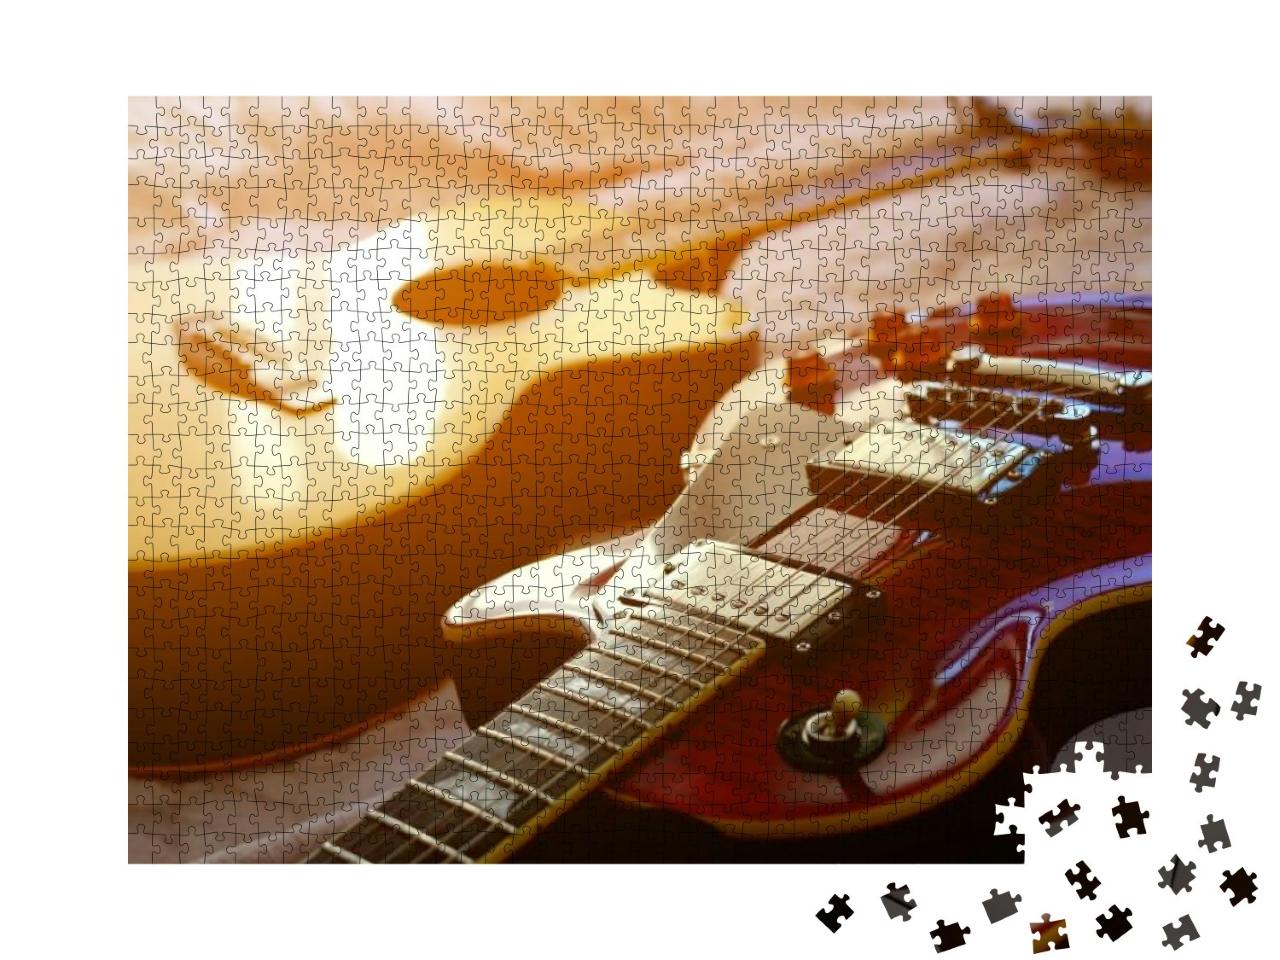 Electric Guitar & Acoustic Guitar, Used to Play Music & N... Jigsaw Puzzle with 1000 pieces